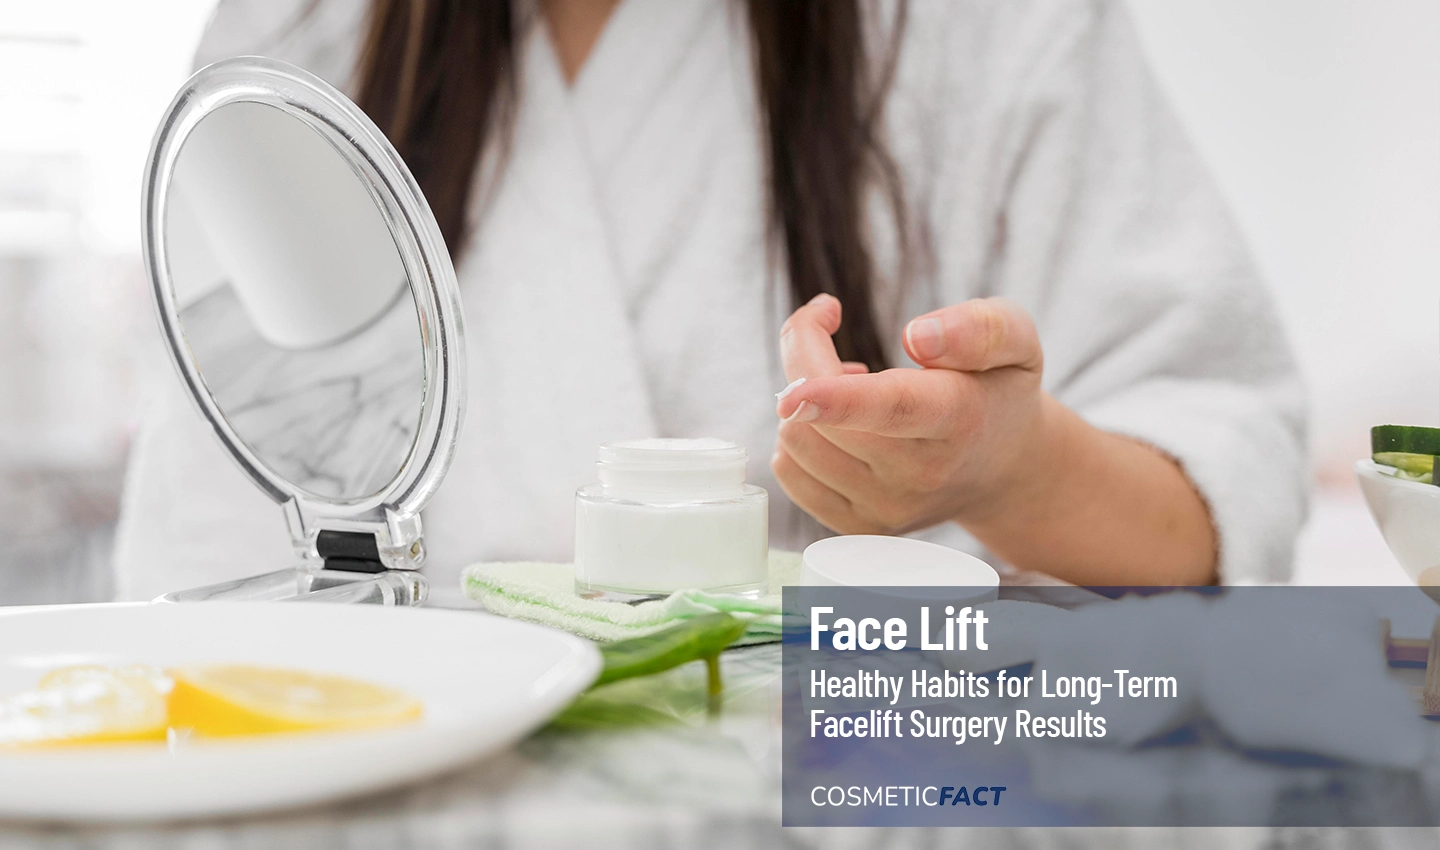 A young woman applies cream to her face to maintain the results of her facelift surgery.